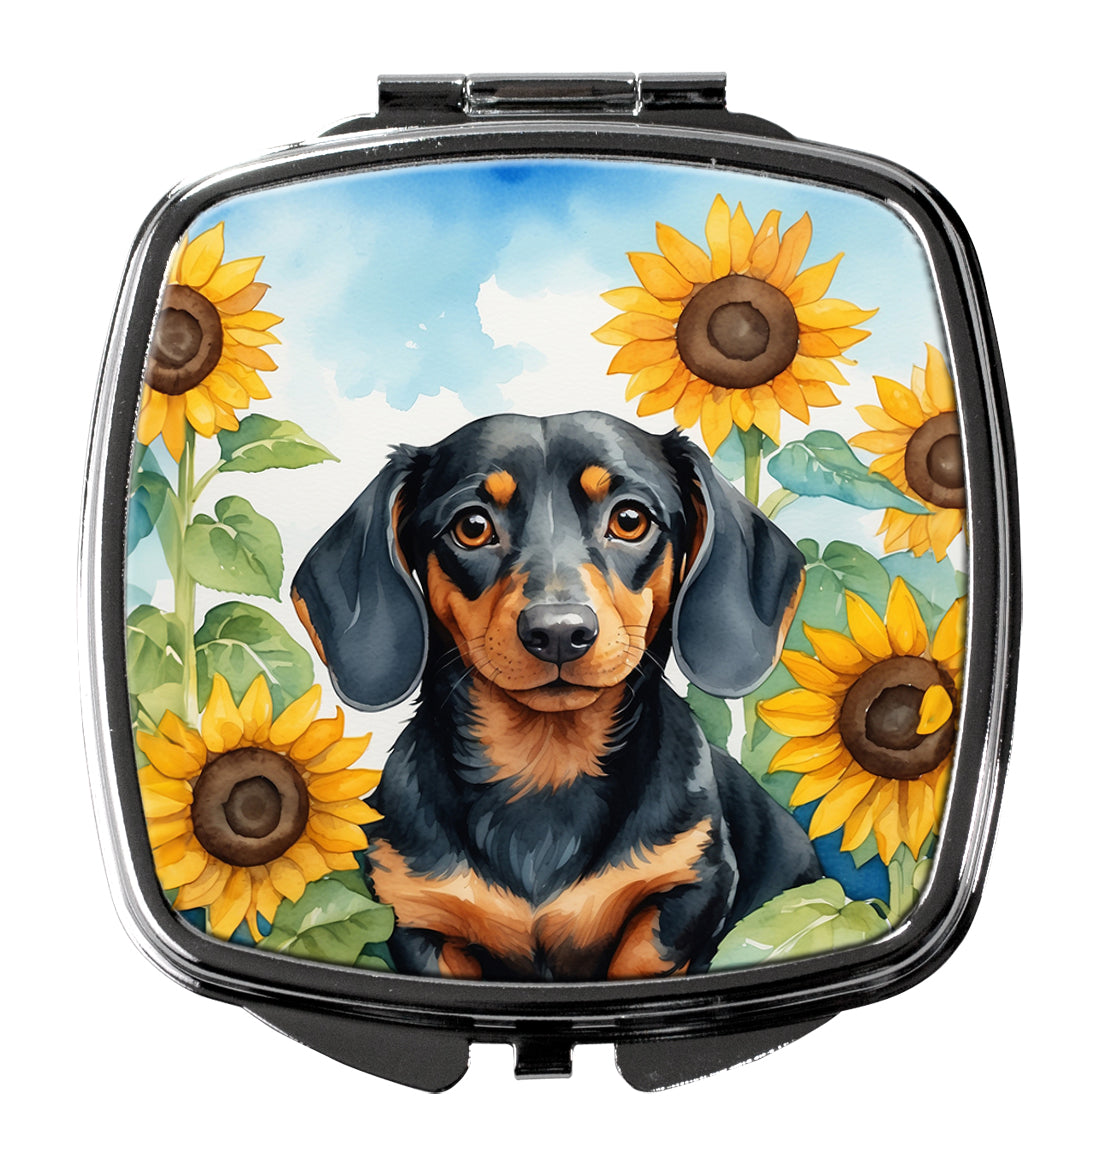 Buy this Dachshund in Sunflowers Compact Mirror